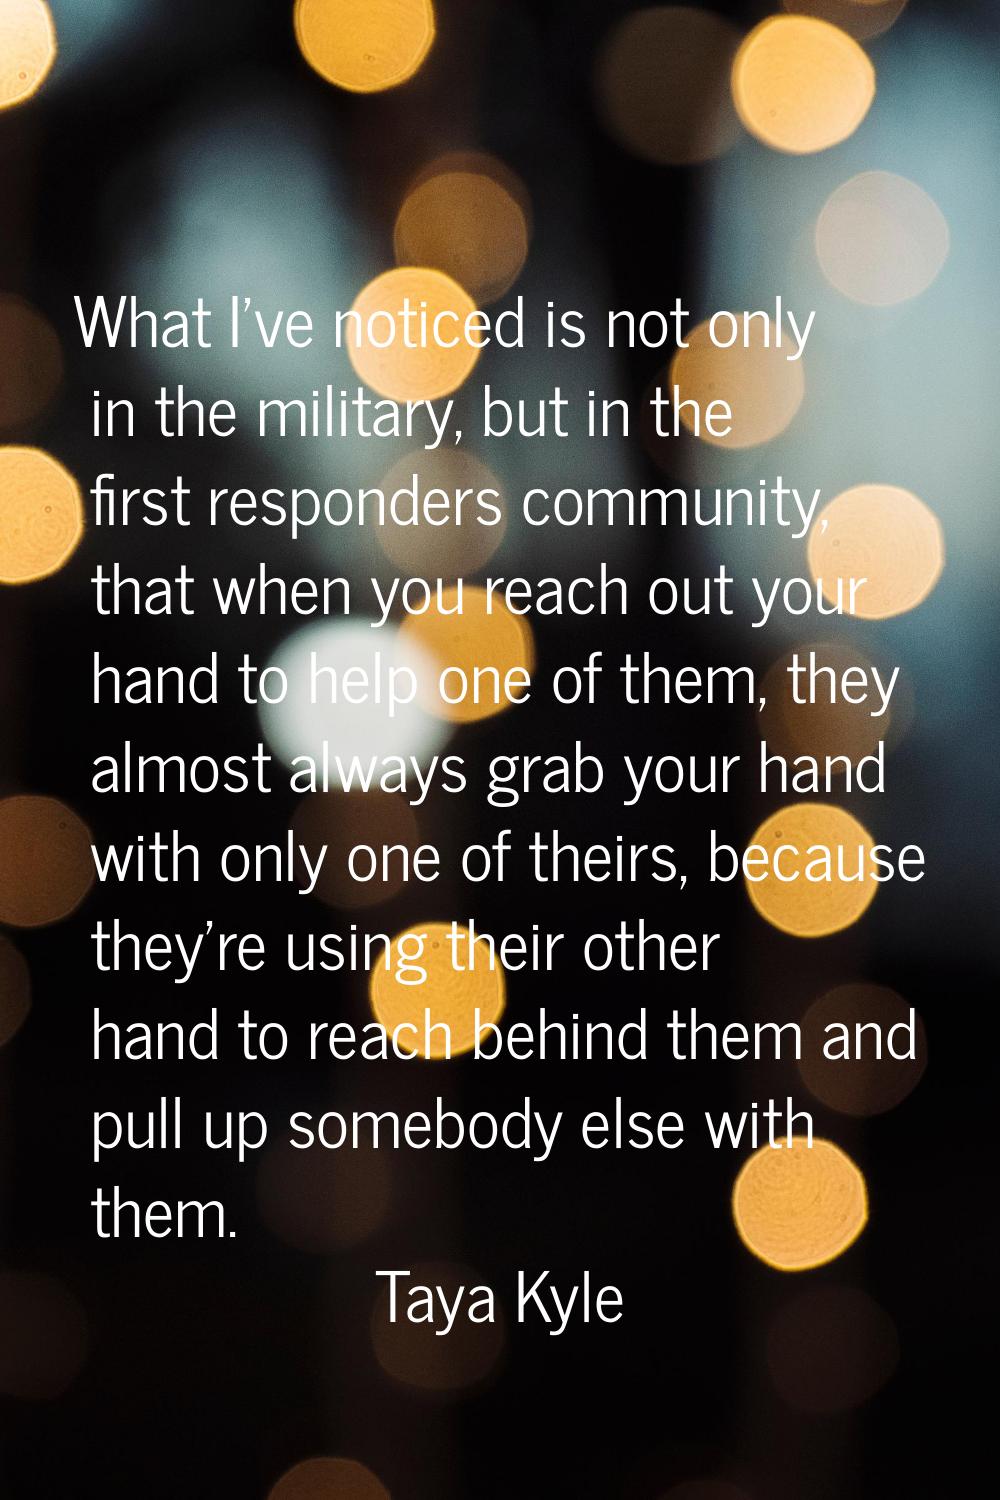 What I've noticed is not only in the military, but in the first responders community, that when you